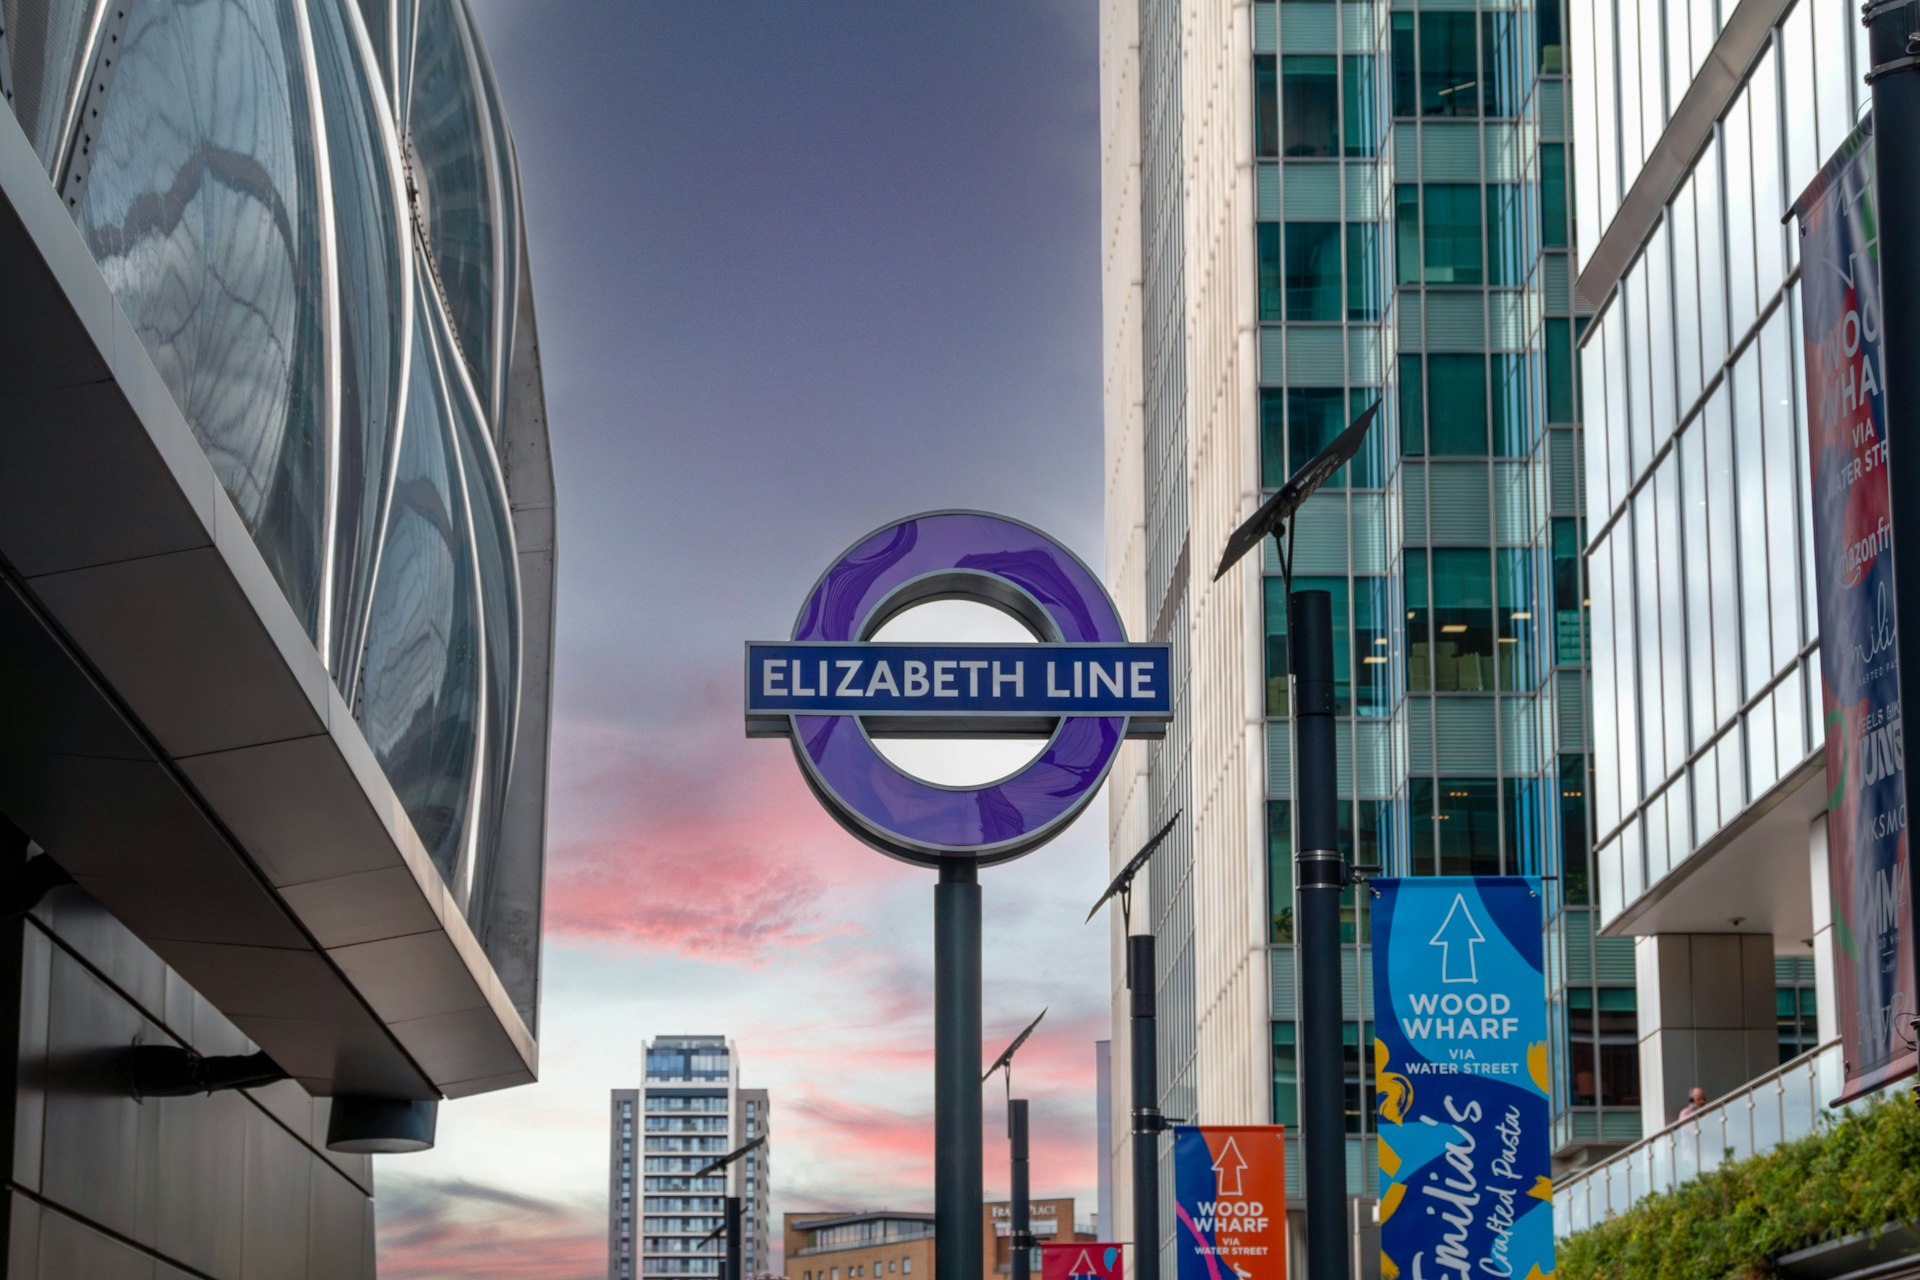 : Railway sign for the Elizabeth Line at Canary Wharf in London just before sunset